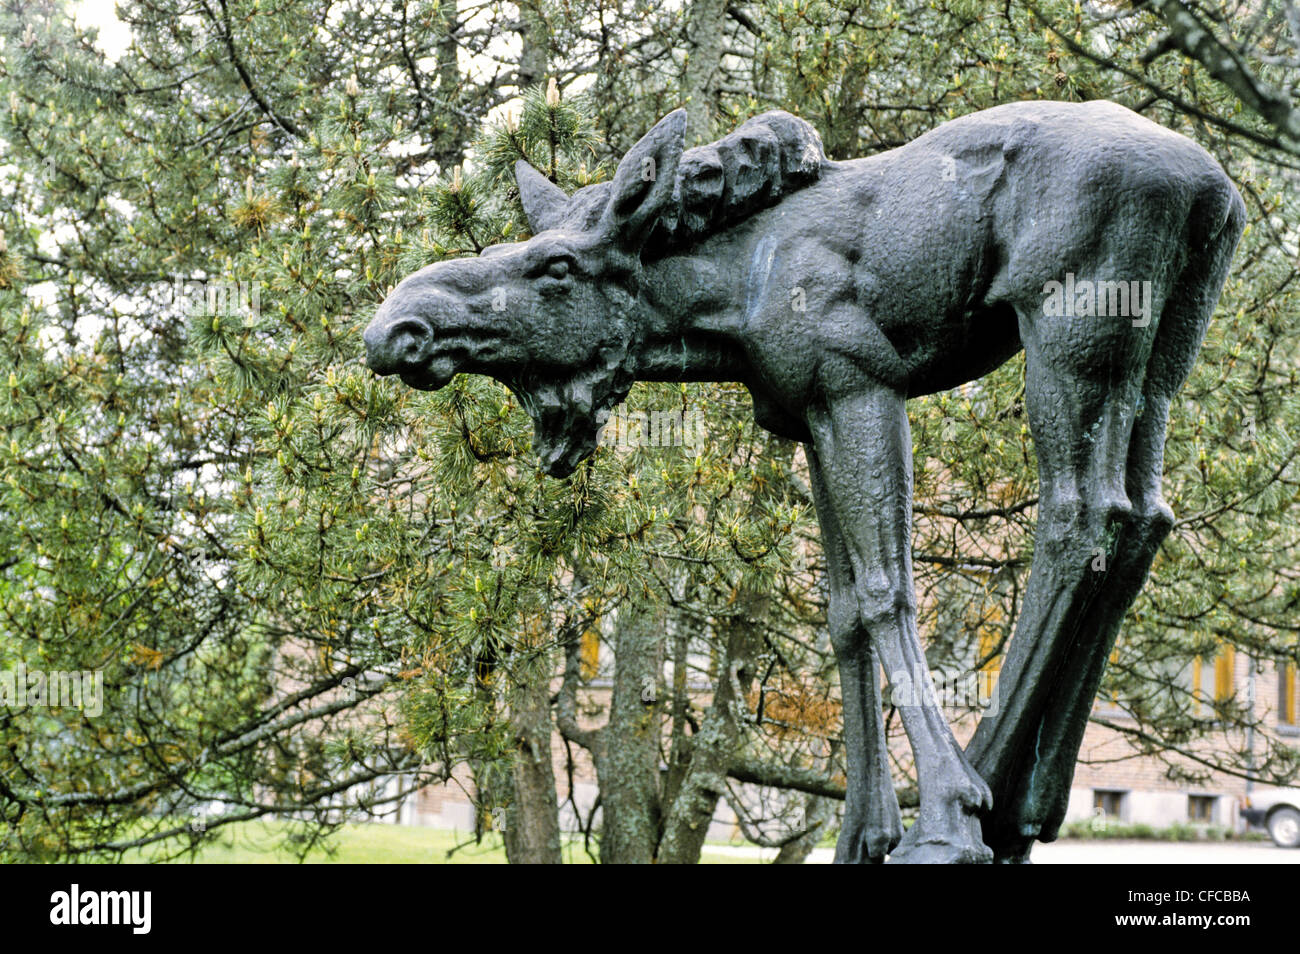 1929 bronze sculpture titled, “The Young Elk” by Jussi Mantynen (1886 - 1978) in Kaisaniemi Park, Helsinki, Finland Stock Photo